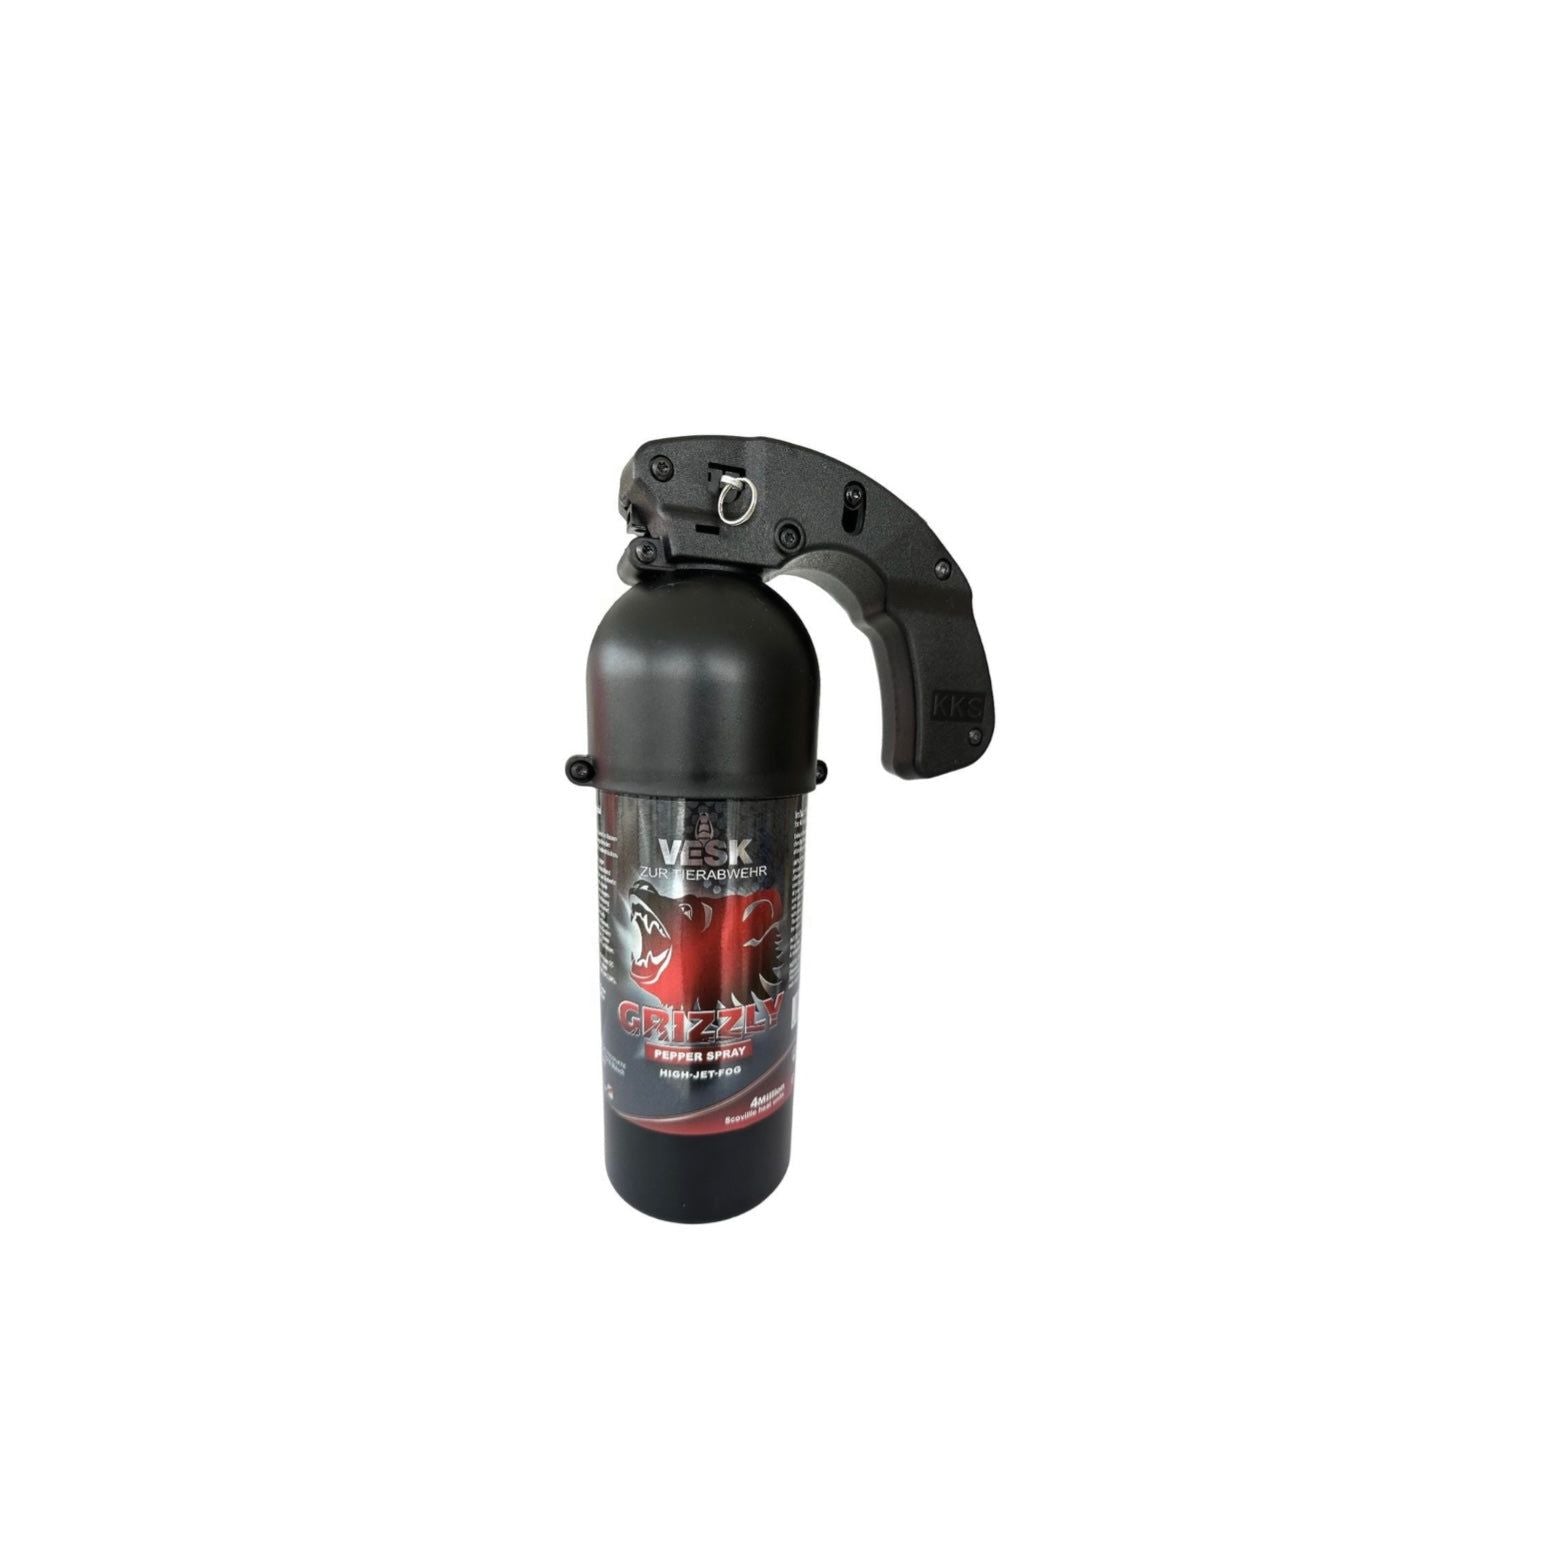 GRIZZLY Pepper Spray 750ml - EXTRA STRONG